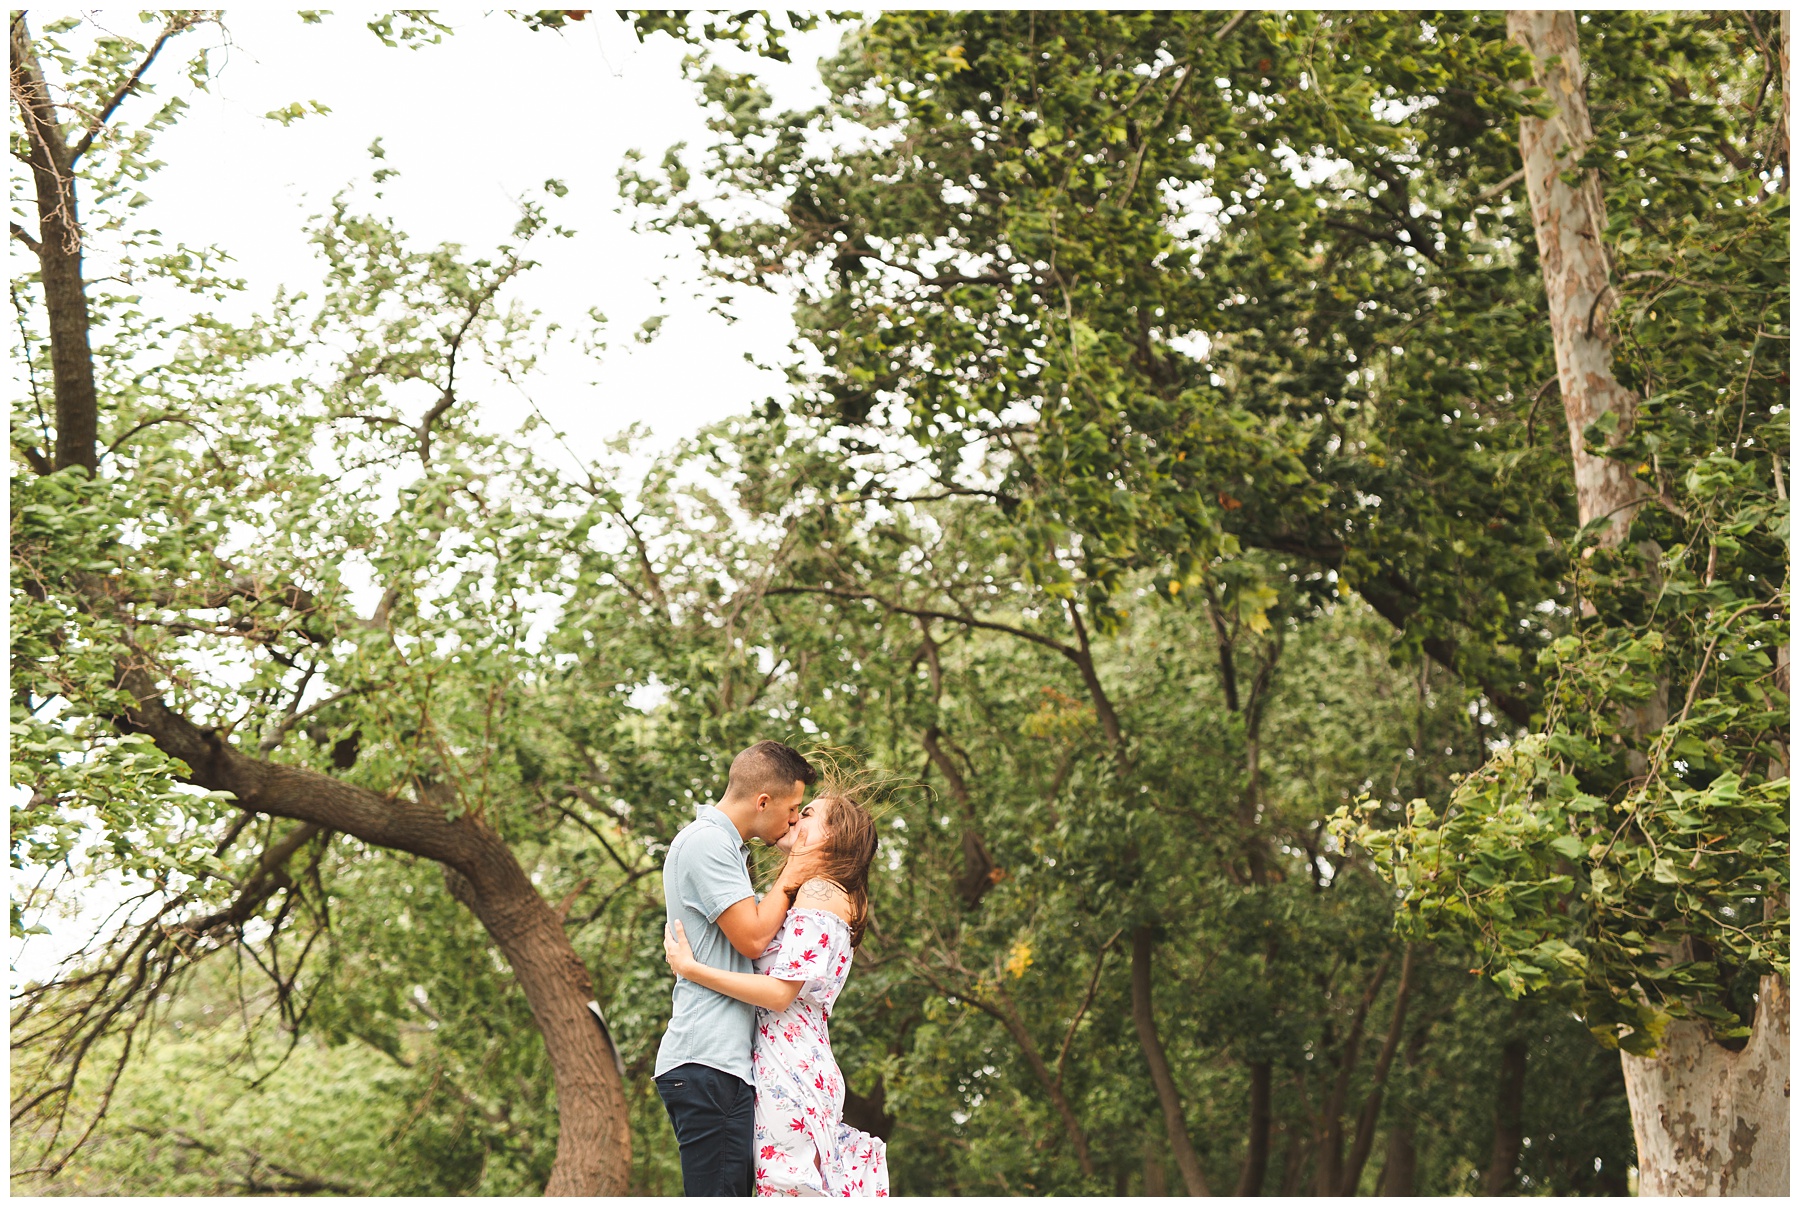 couple kissing among the trees during engagement session at Long Dock Park in Beacon NY
